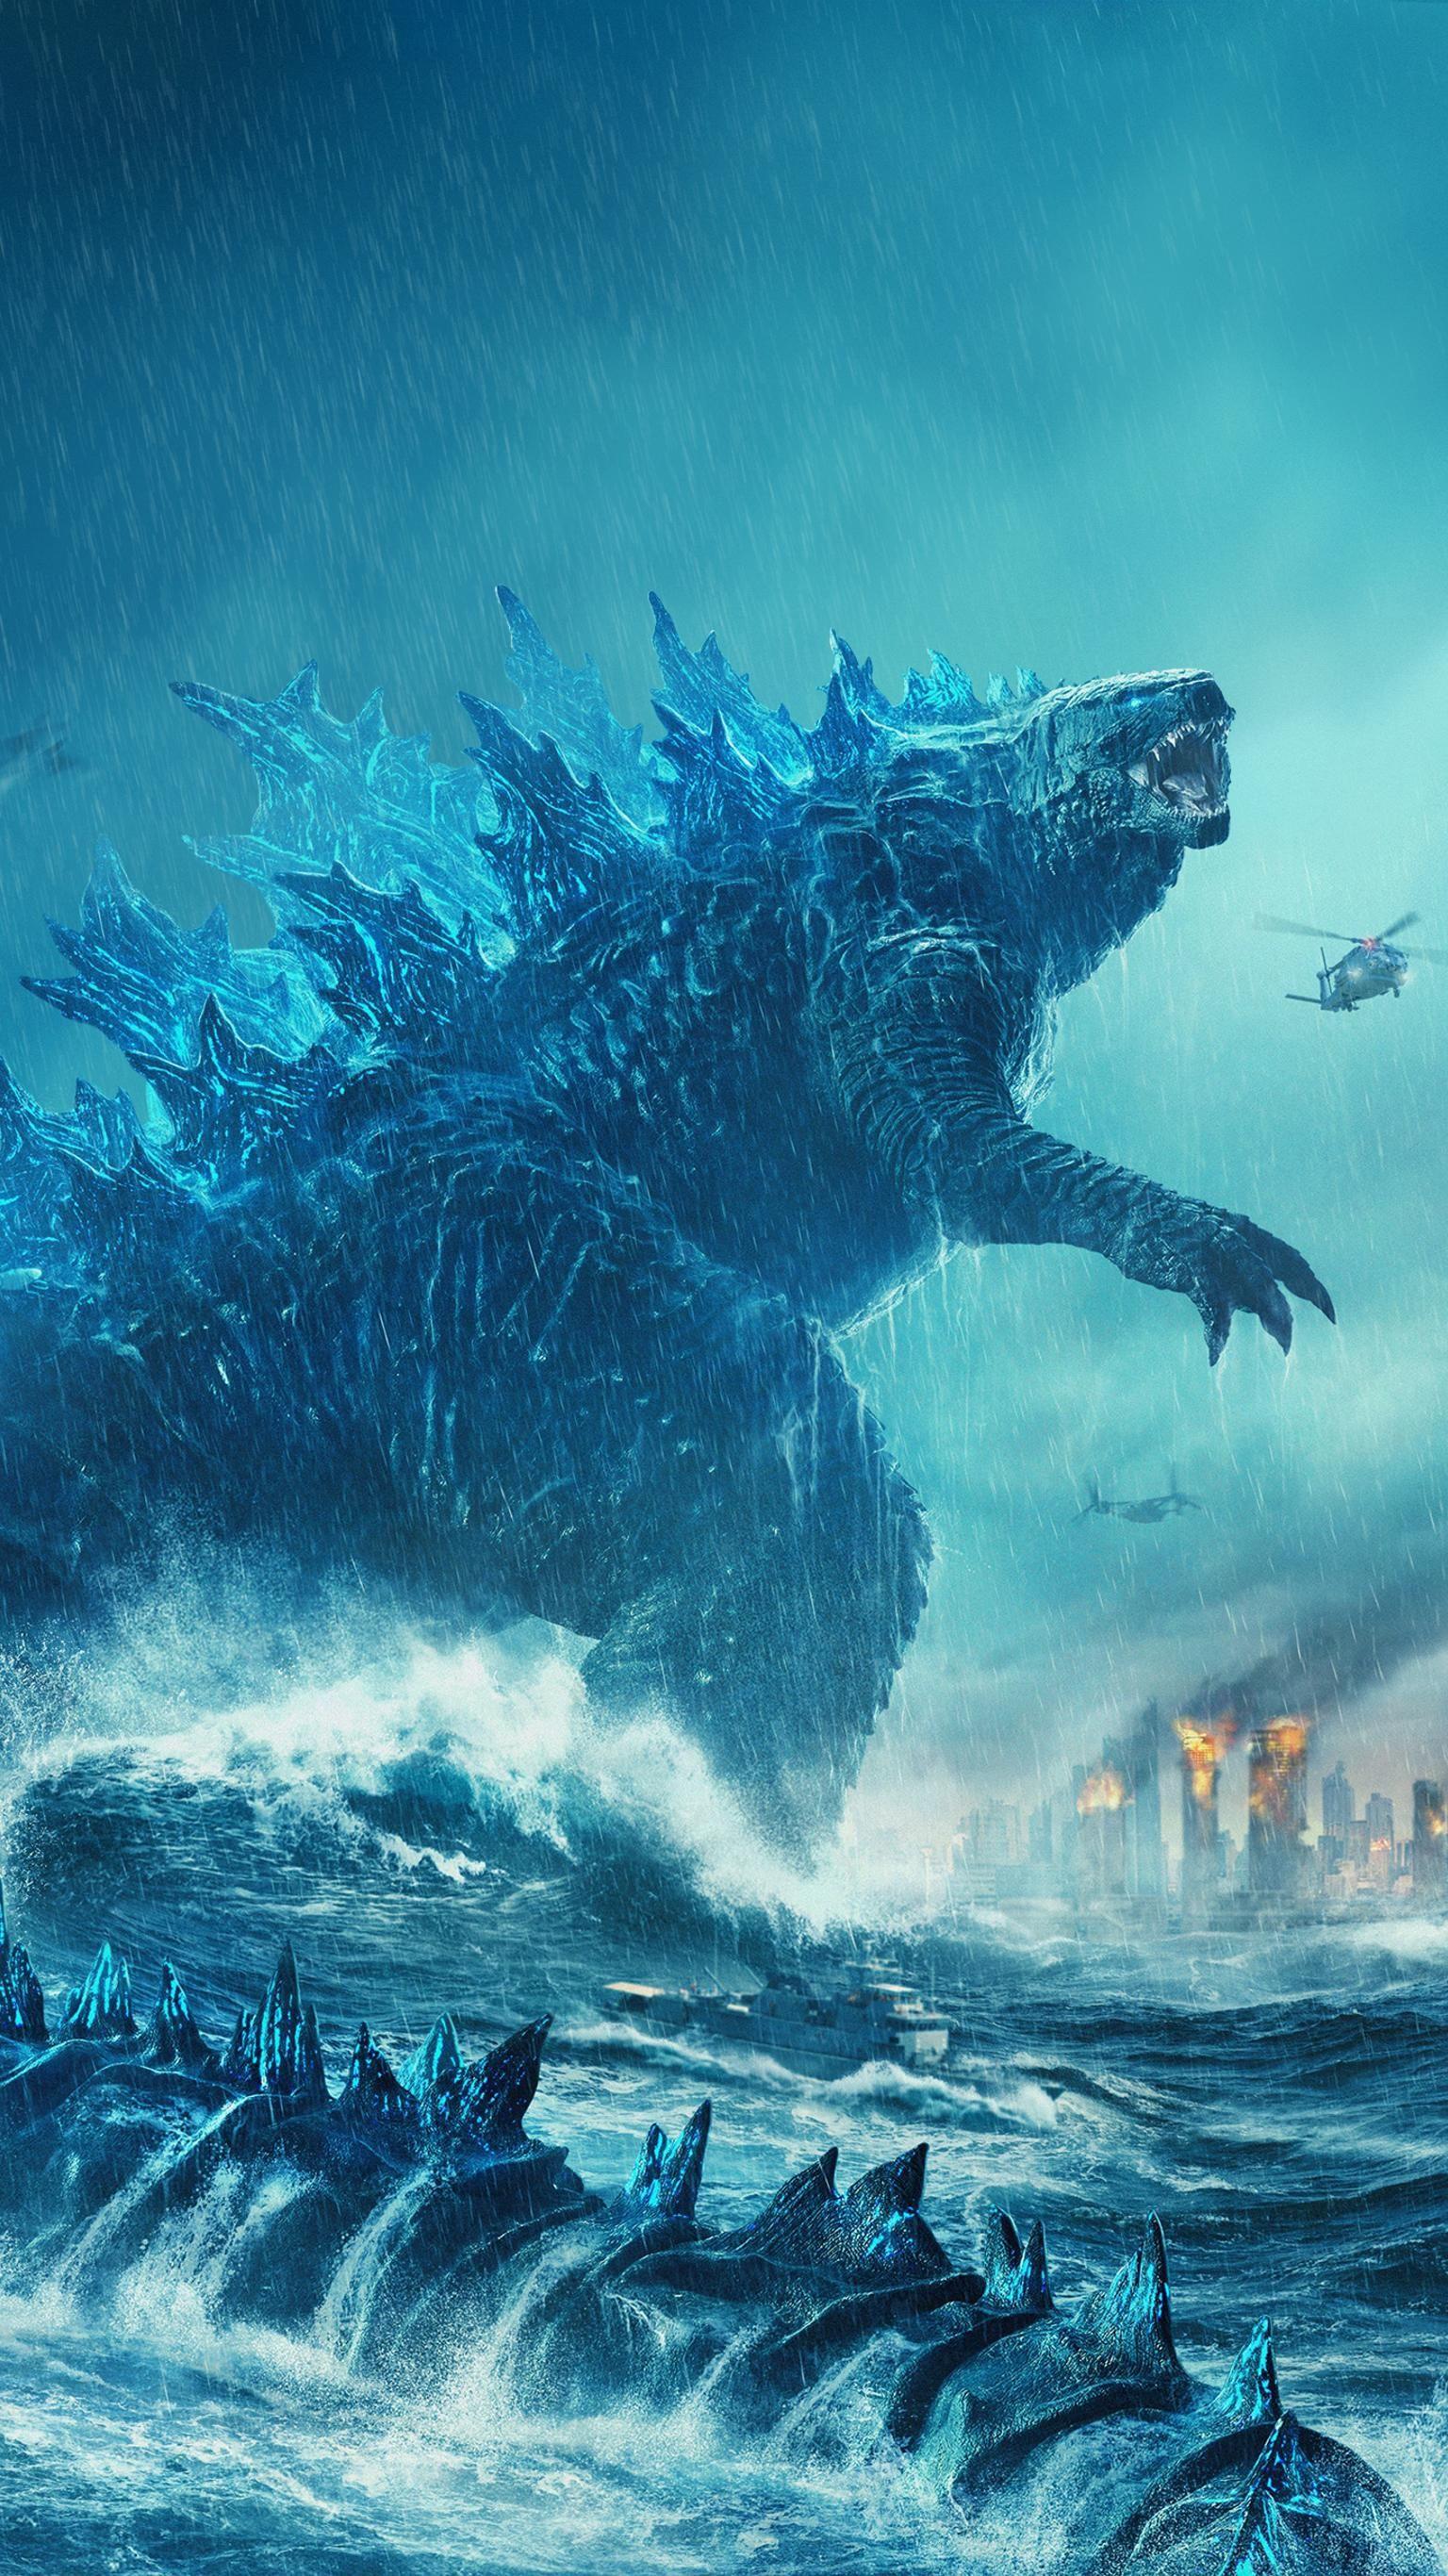 Godzilla: King of the Monsters (2019) Phone Wallpaper in 2020